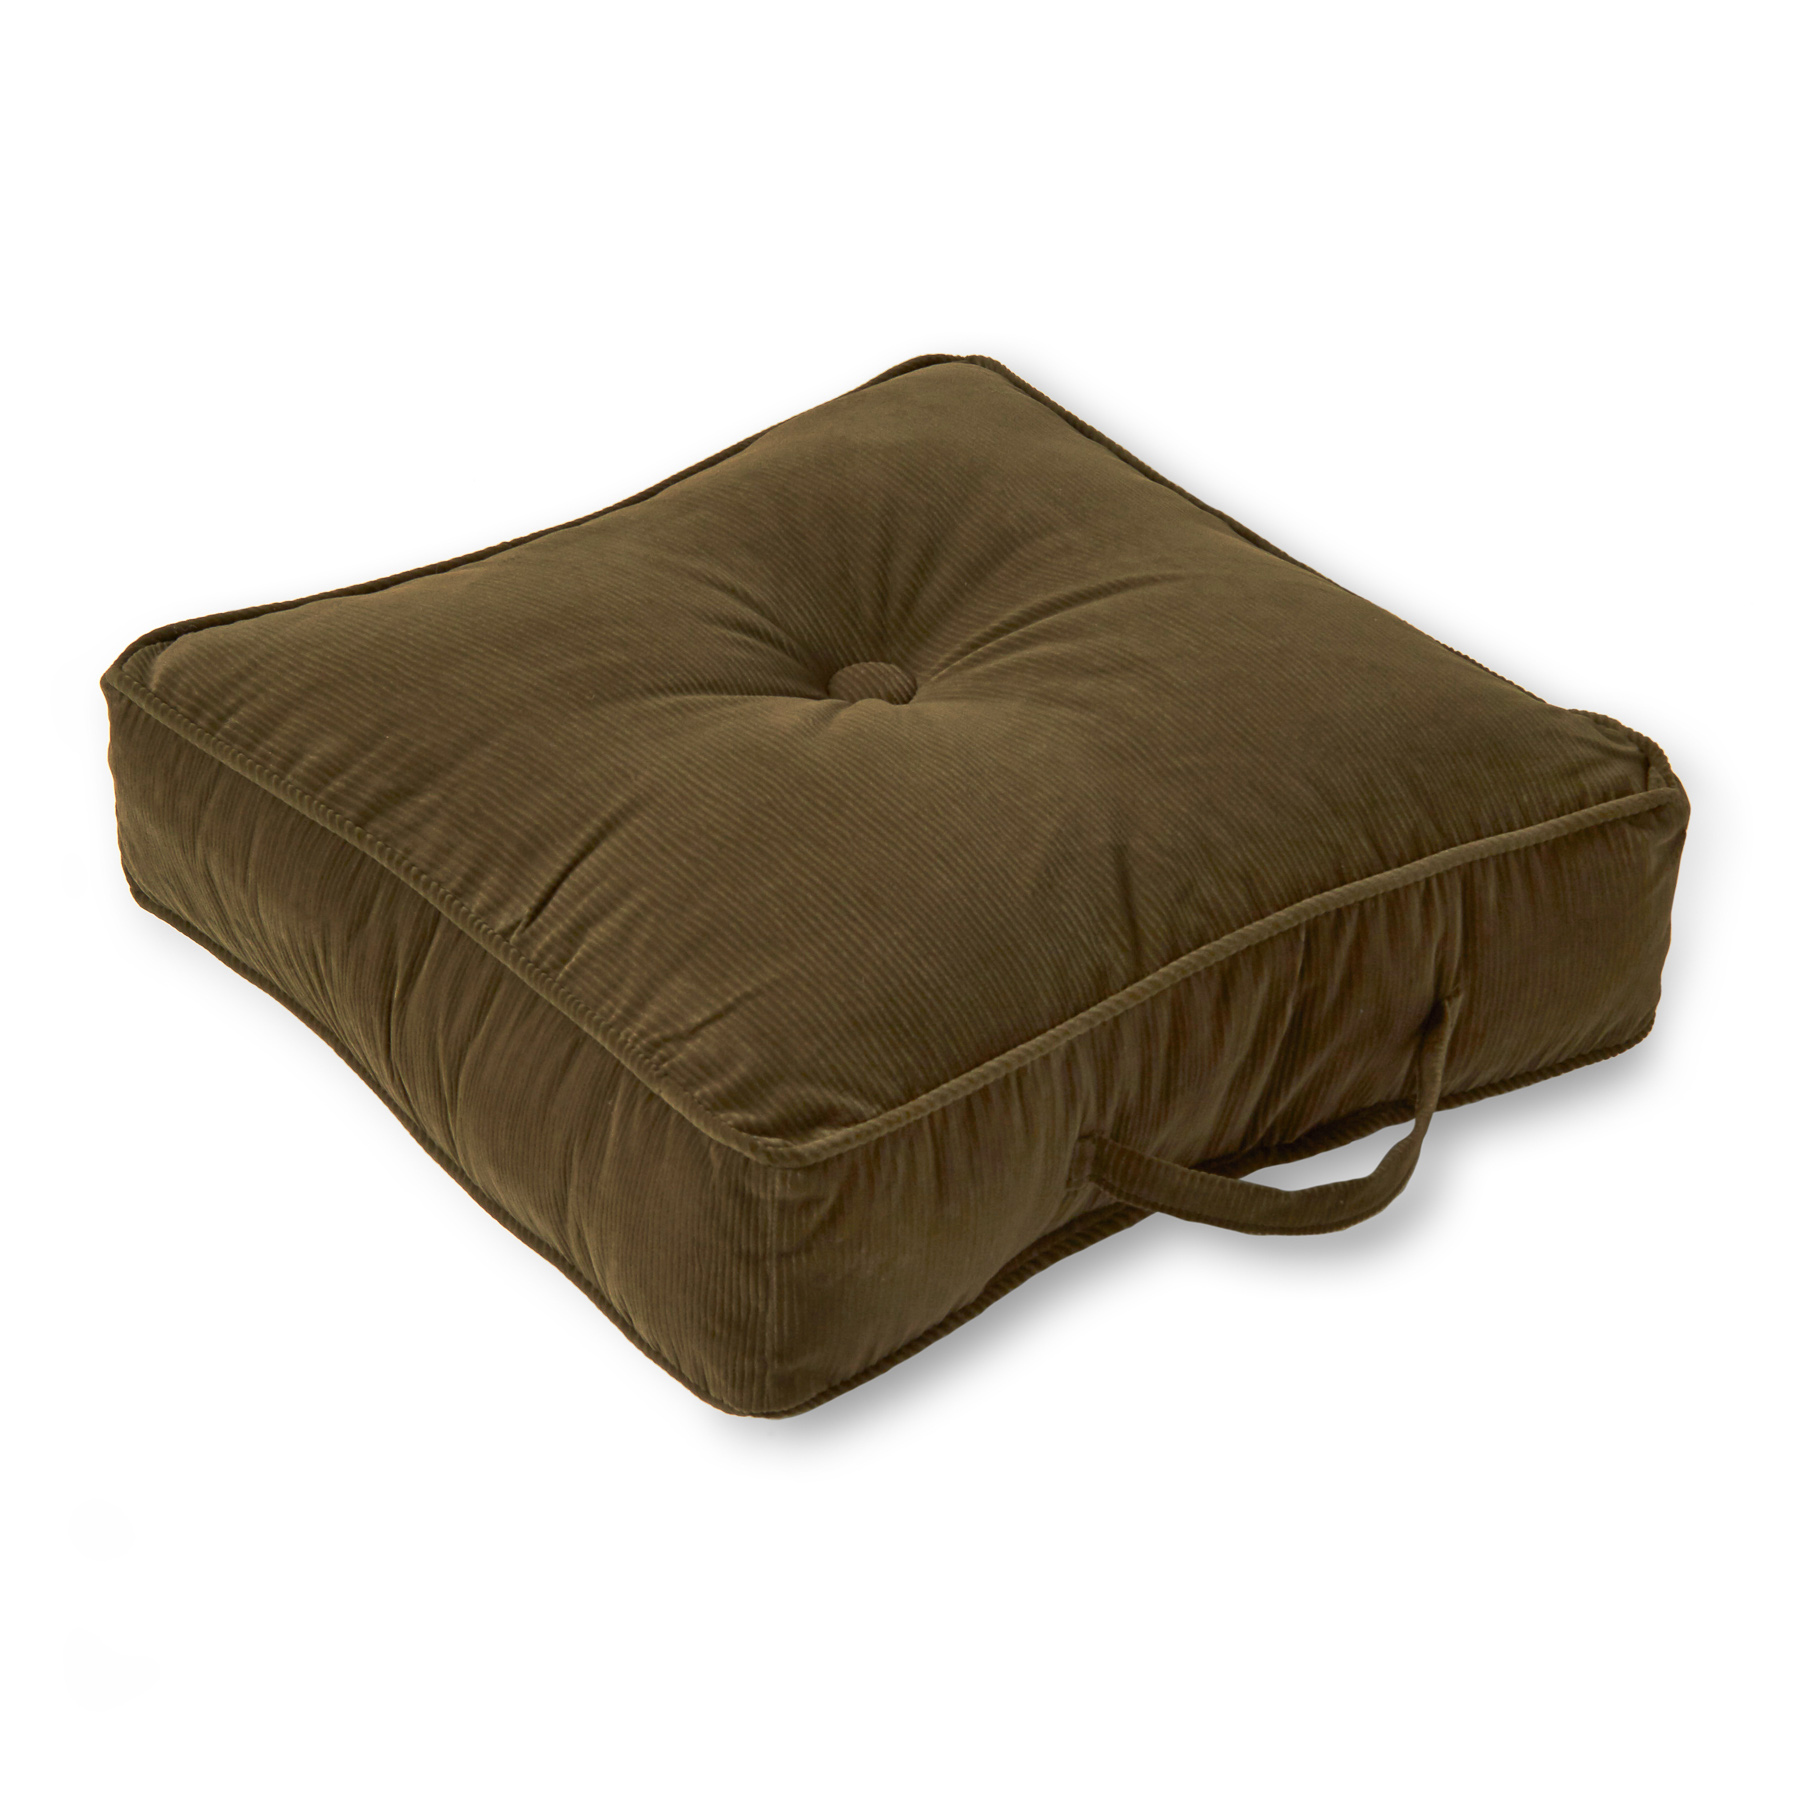 Omaha Sage Microfiber 21 in. Square Floor Pillow - image 1 of 6